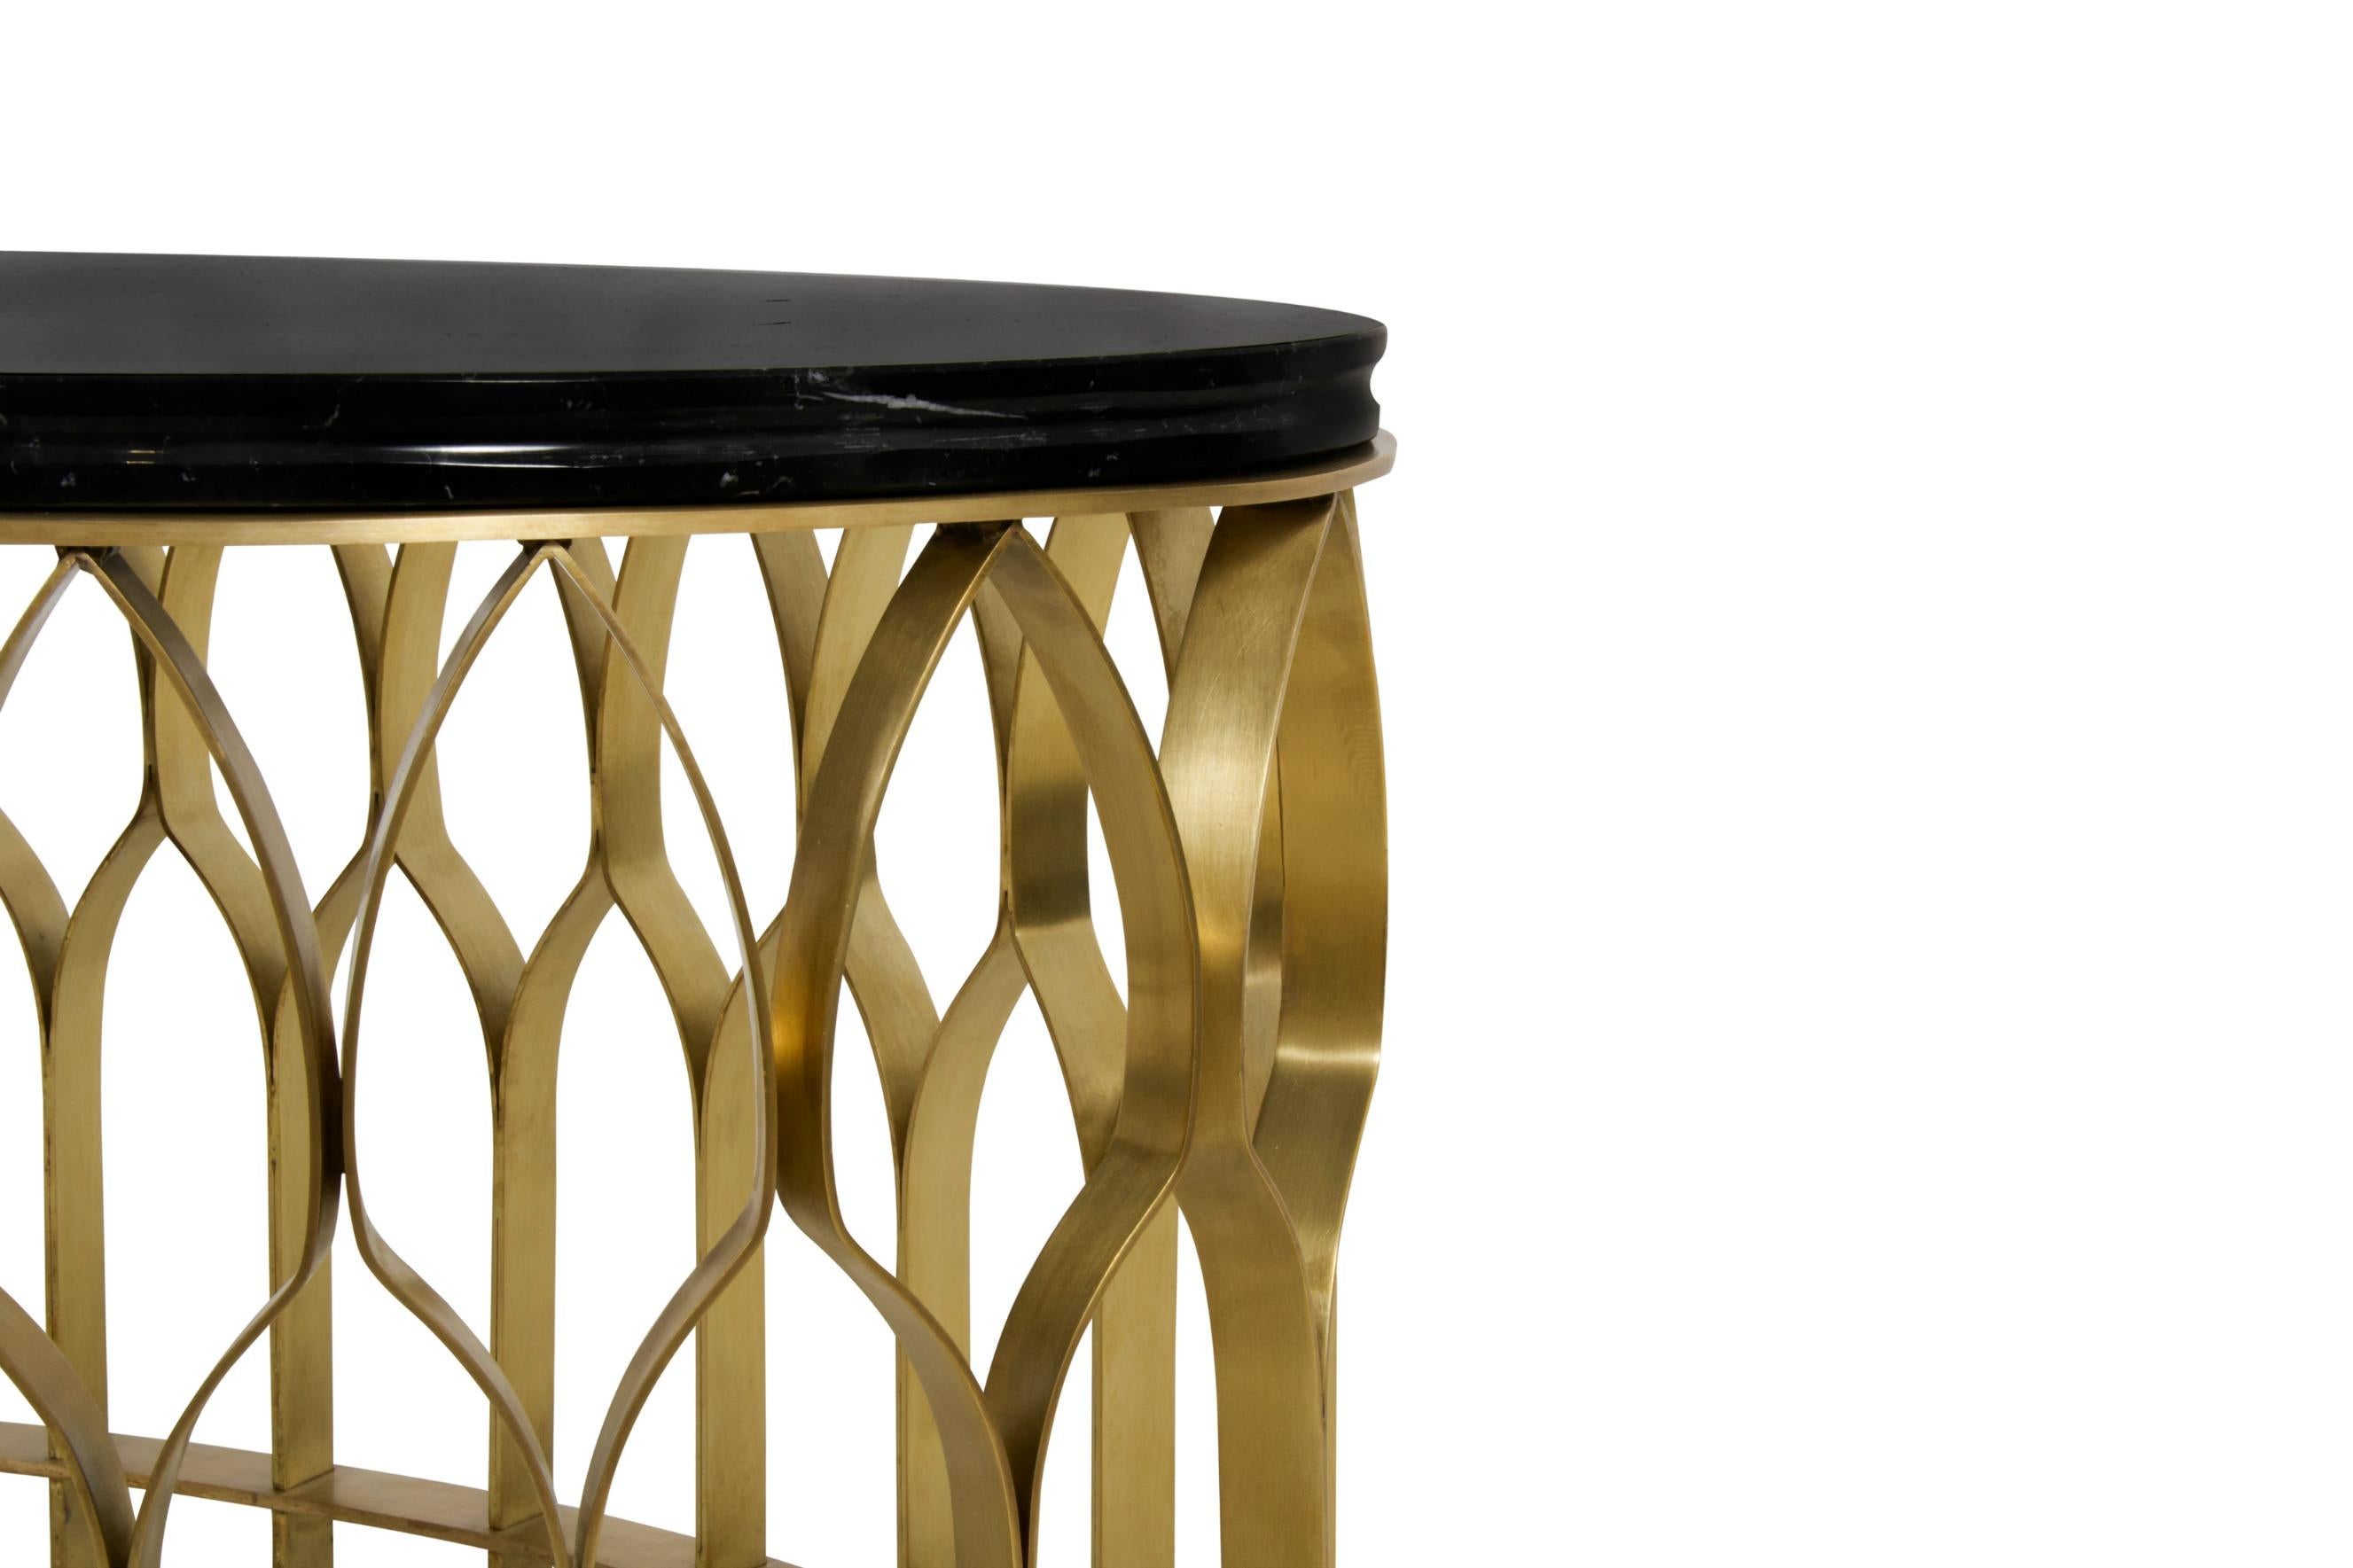 Mosques are not only places for the spiritual cult but also majestic architectural works. MECCA Center Table features brushed aged brass matte columns that resemble the architectural heritage from the mosques. This round coffee table will enhance